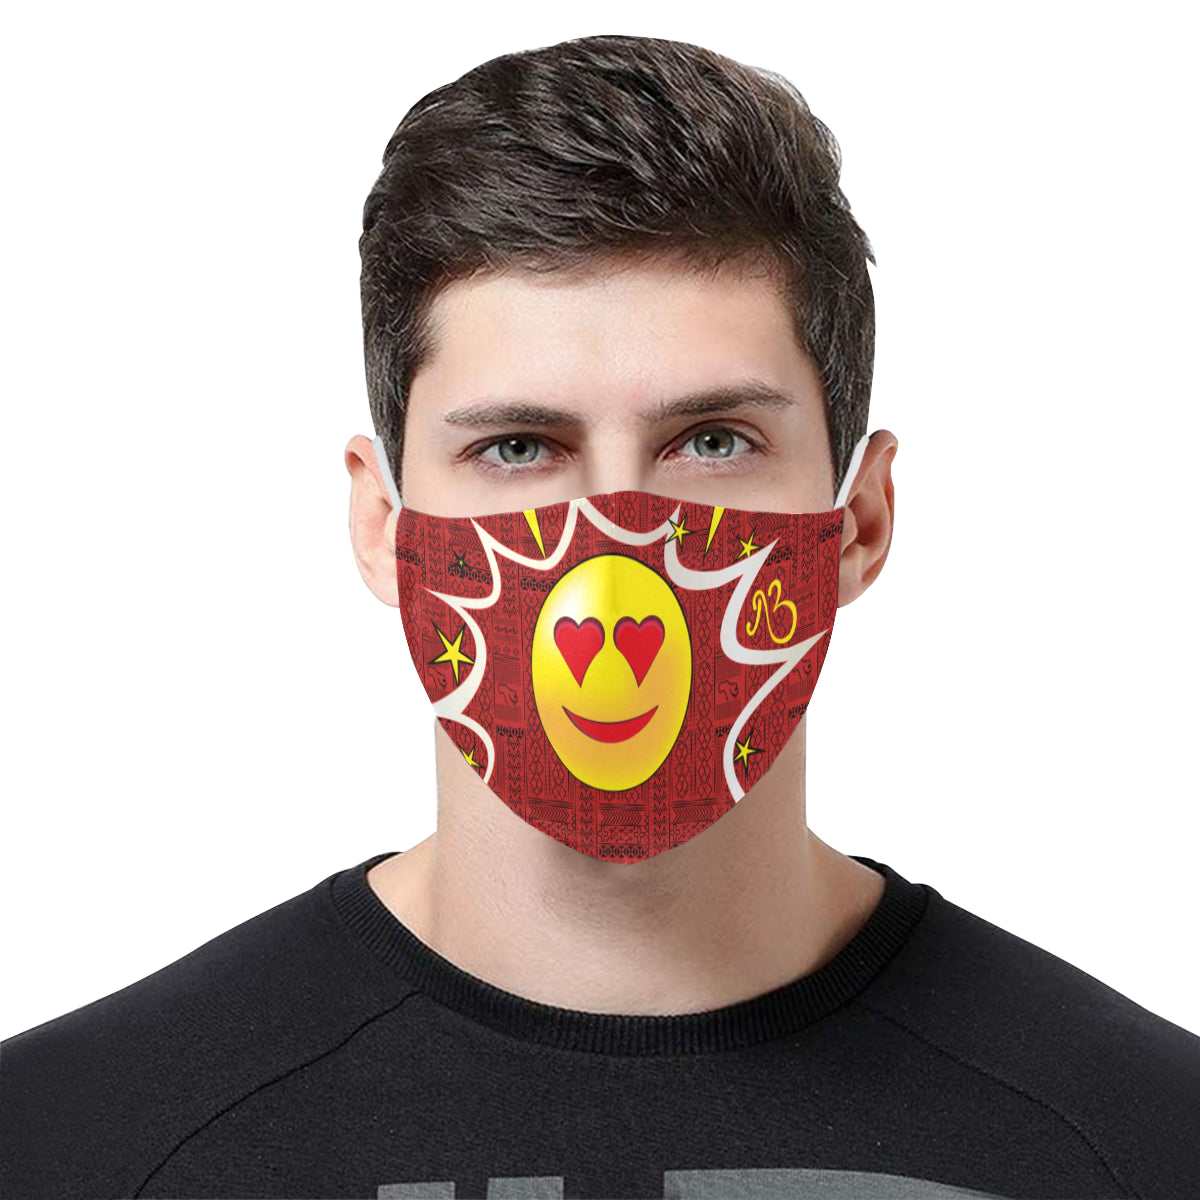 Heart Tribal Print Comic Emoji Cotton Fabric Face Mask with Filter Slot and Adjustable Strap - Non-medical use (2 Filters Included)